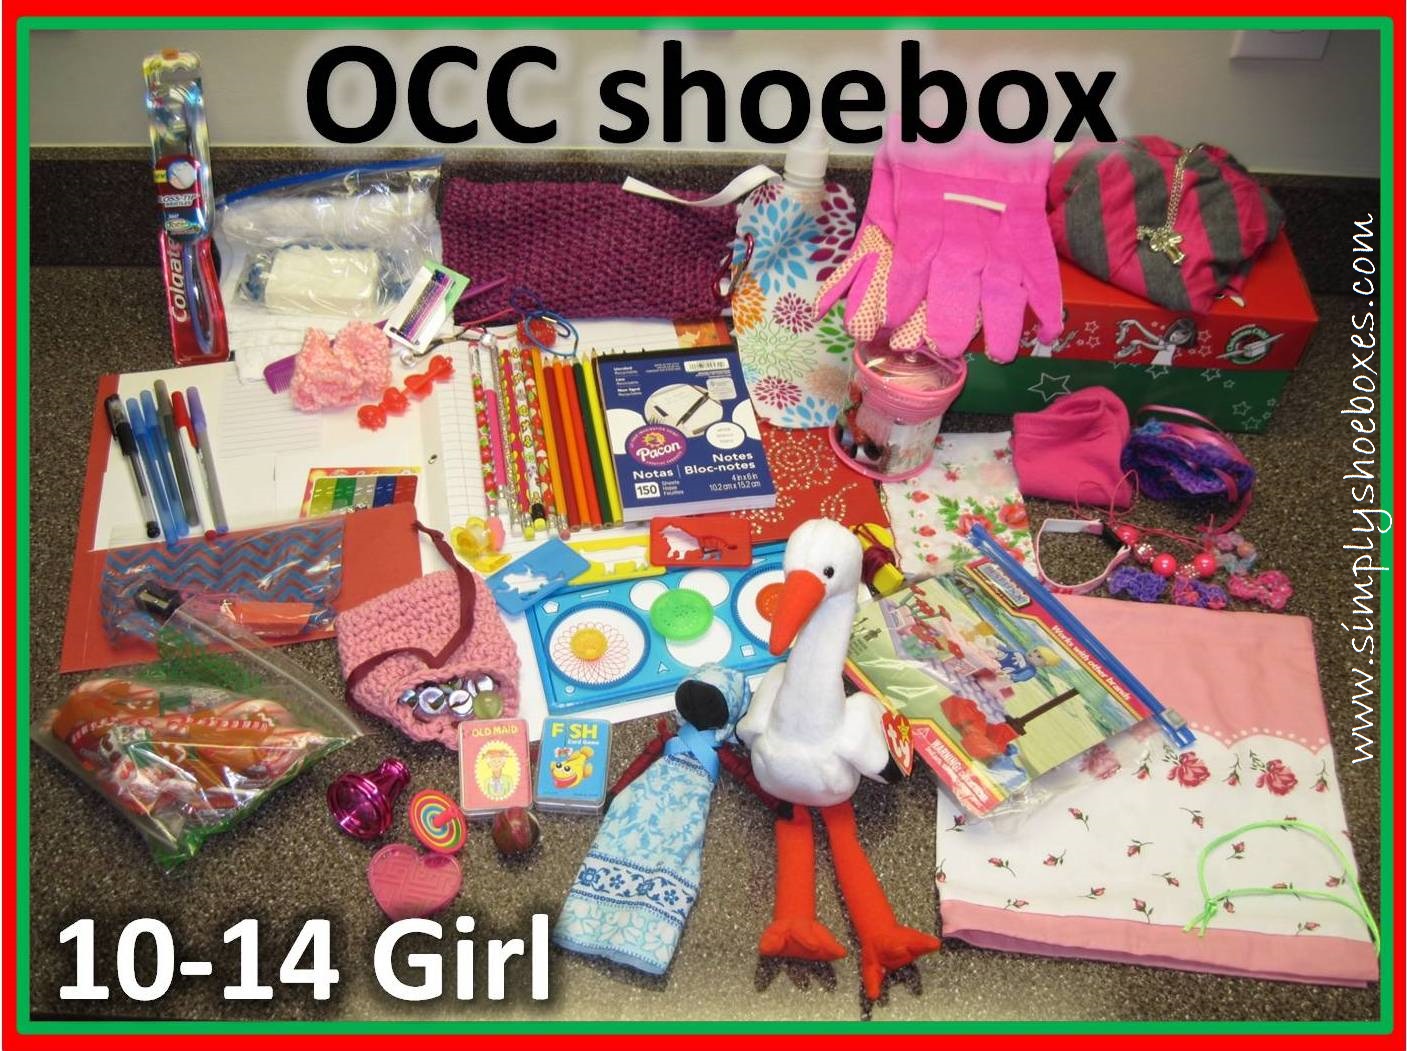 Simply Shoeboxes: Operation Christmas Child Shoebox for 10-14 Year Old Girl